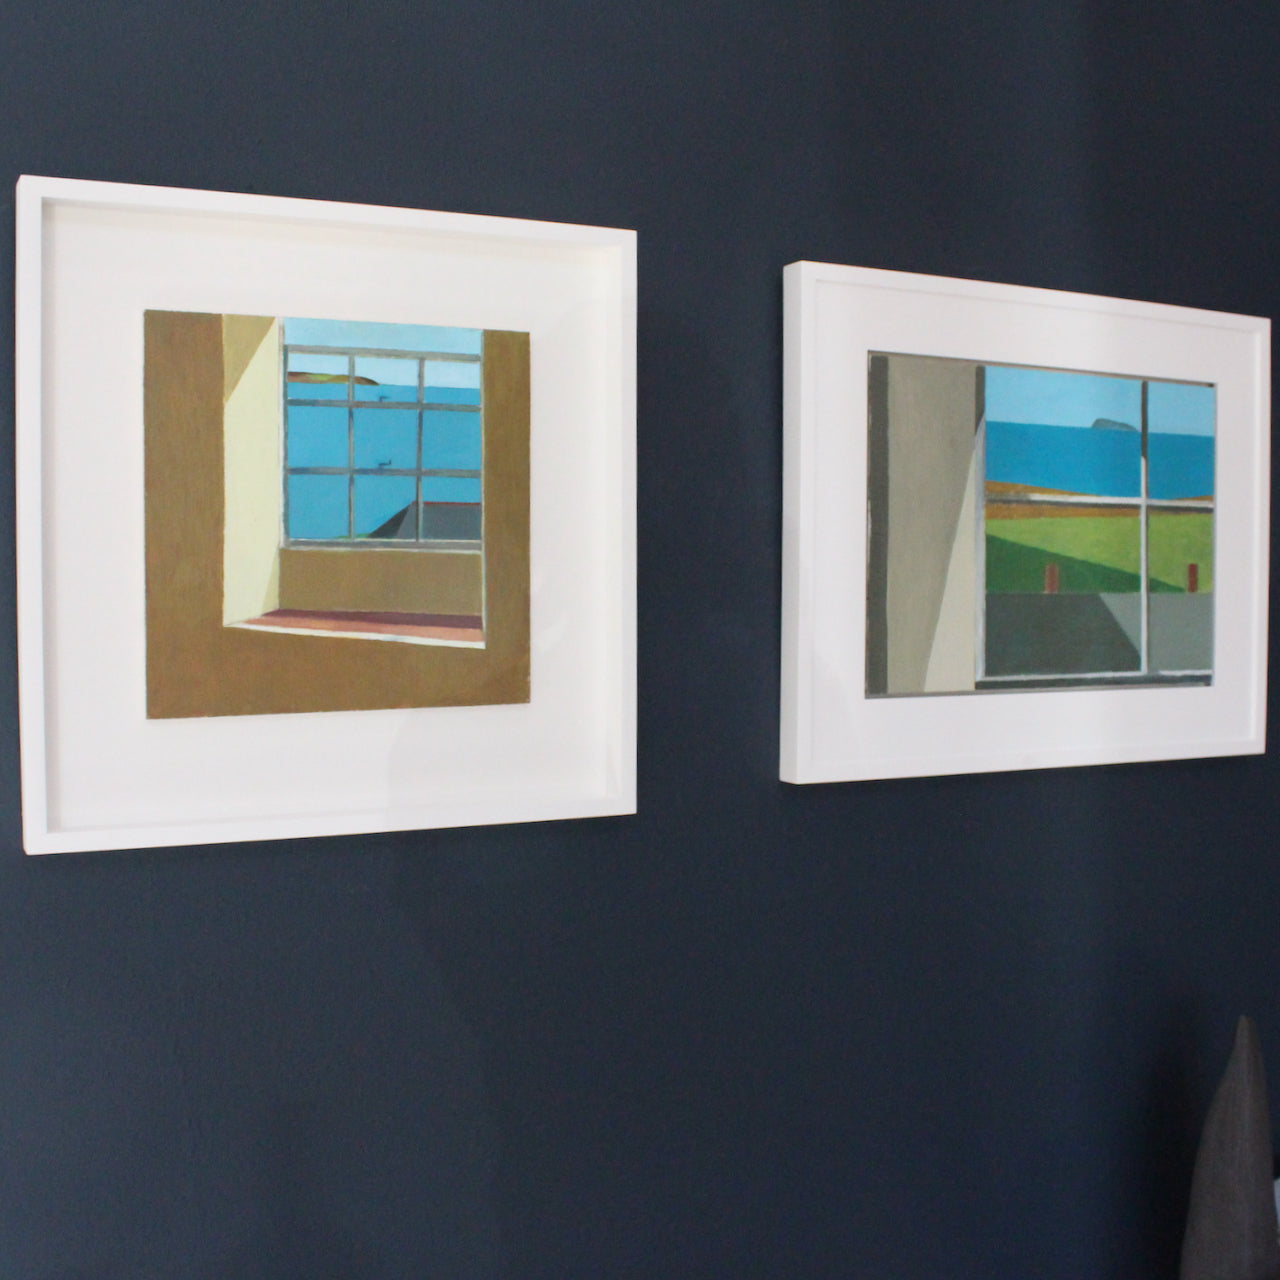 Painter Philip Lyons, framed painting of white wall with view through window panes to green grass area and blue coastline.